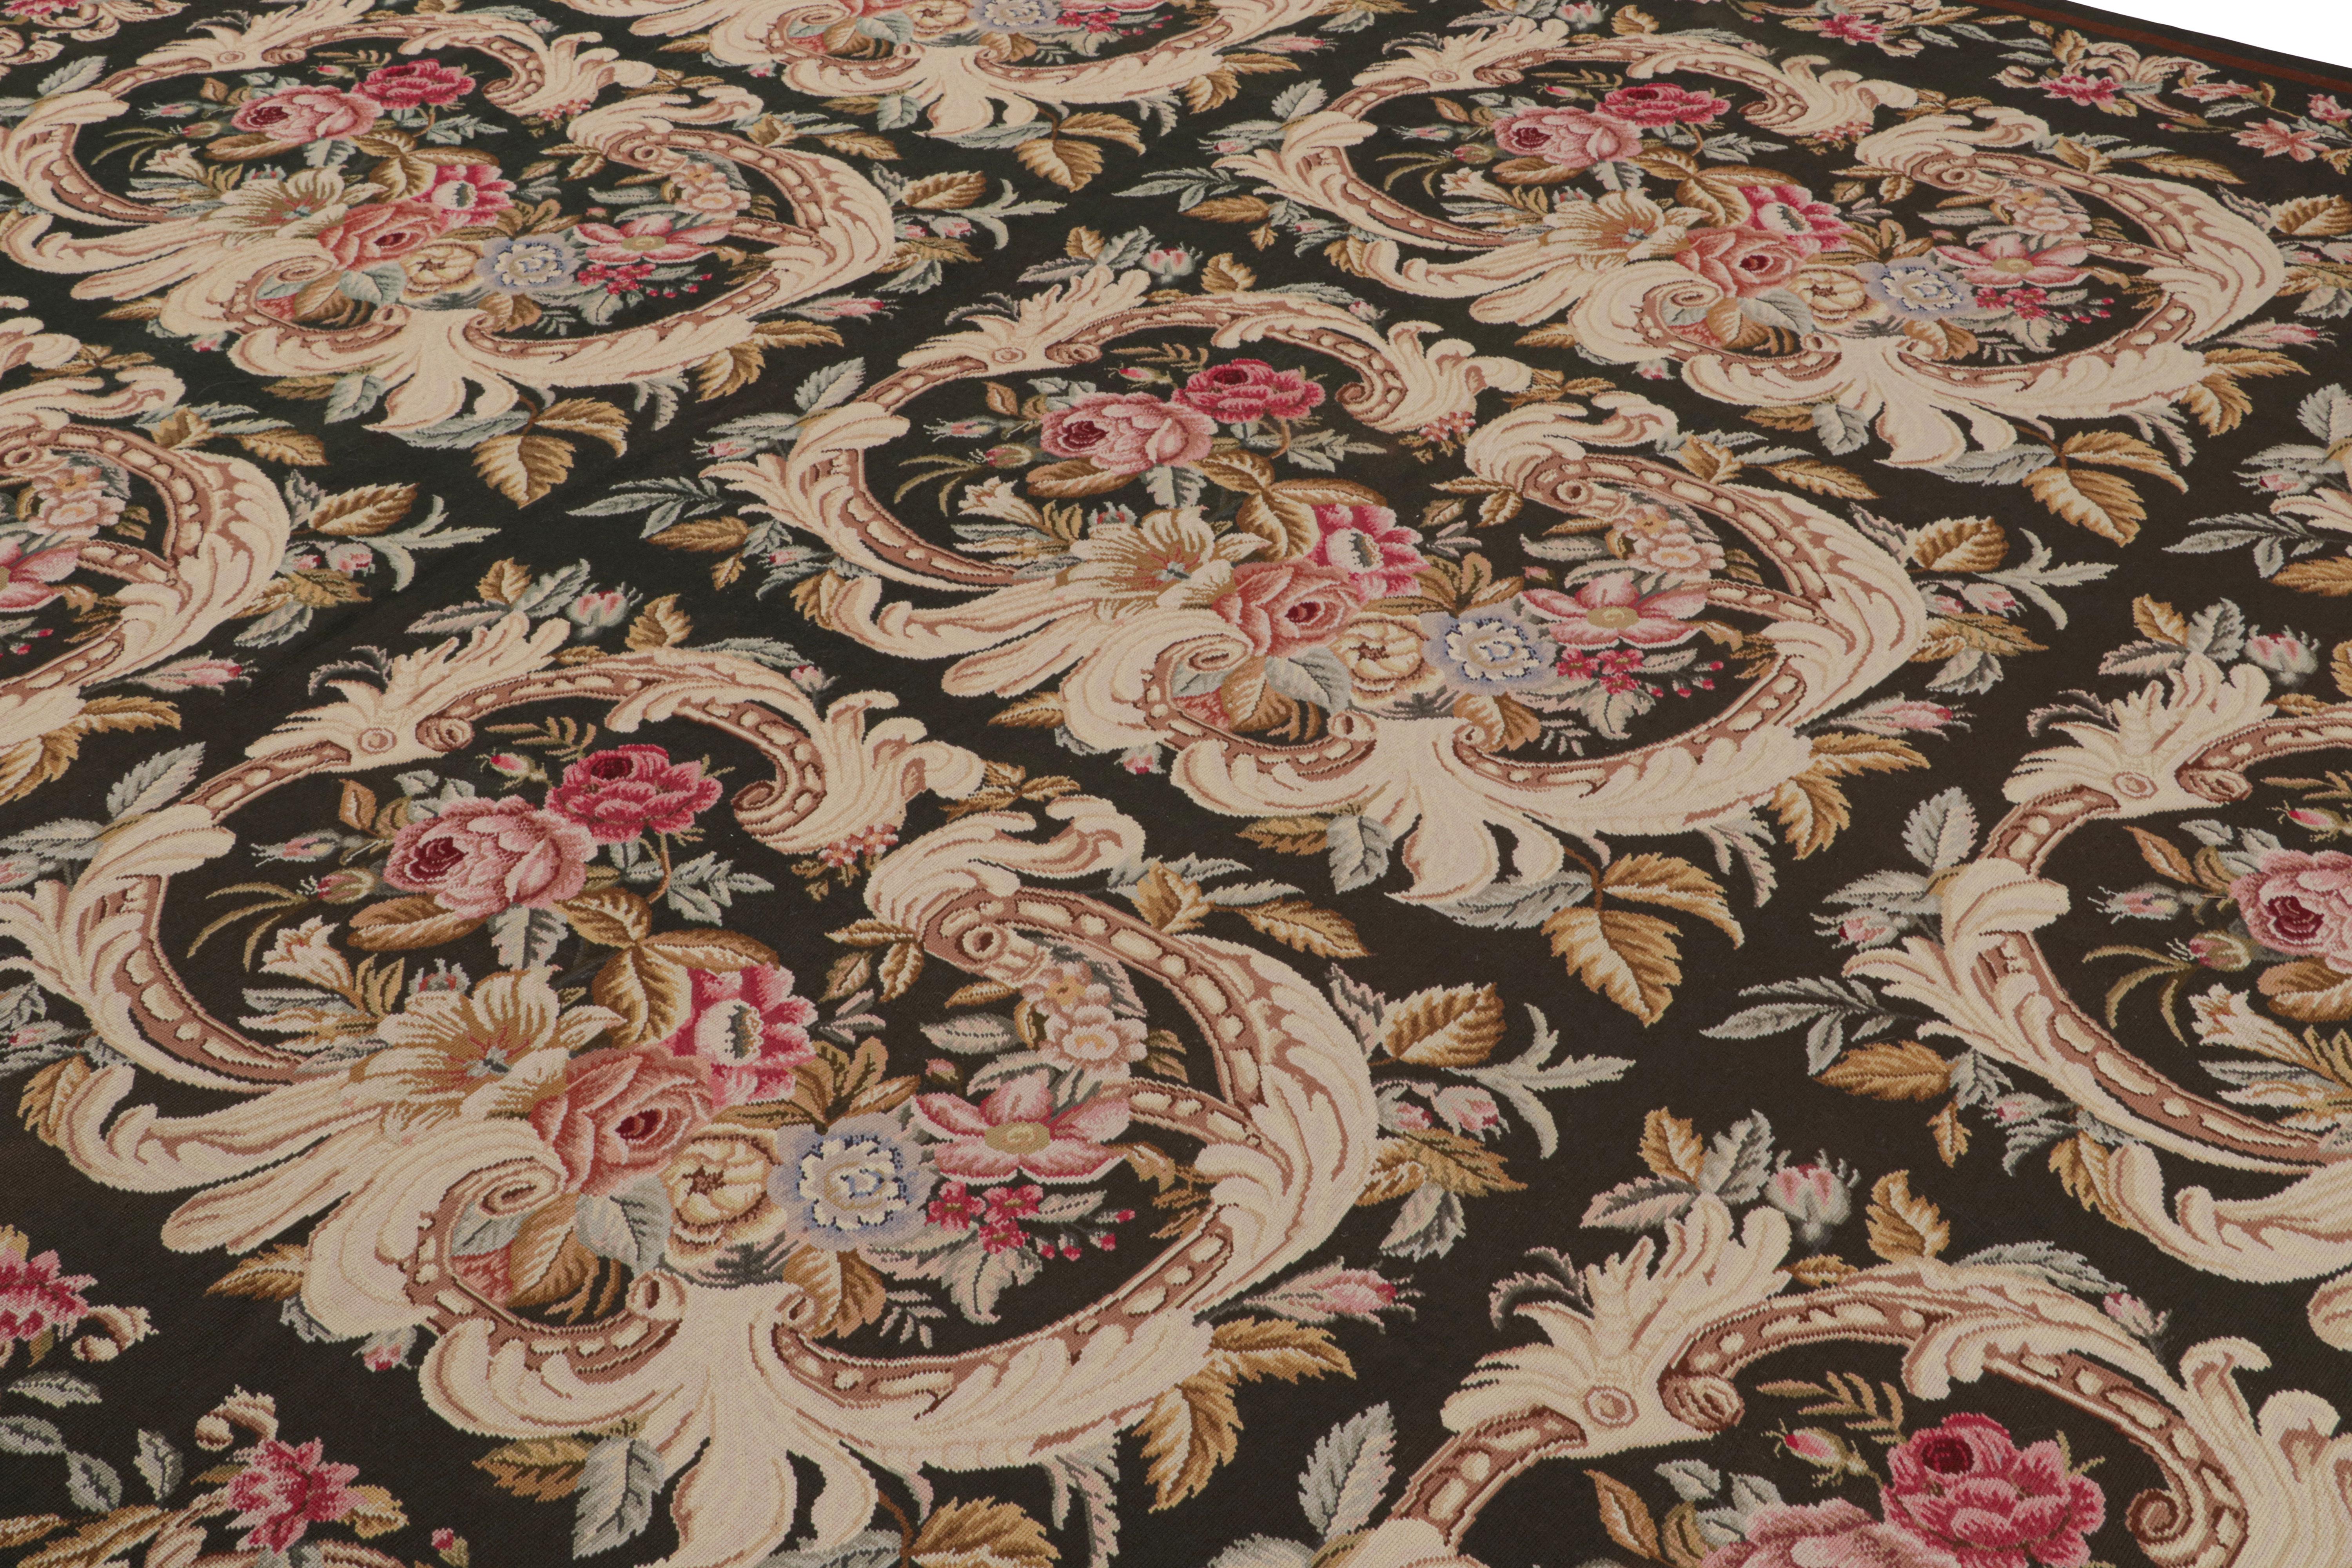 Chinese Rug & Kilim’s French Needlepoint Rug in Rich Brown With All-Over Floral Patterns For Sale